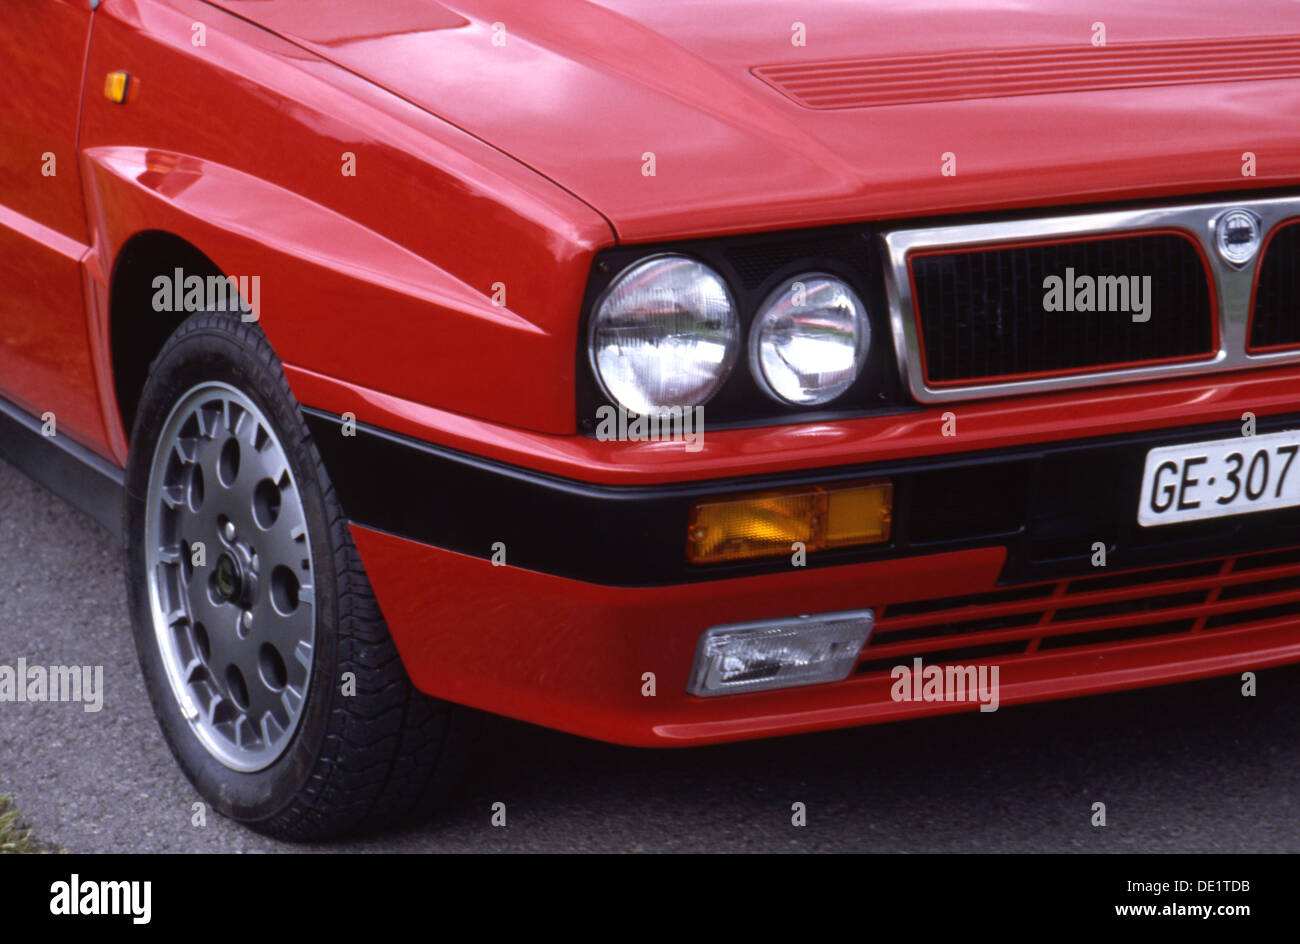 Lancia Delta Integrale Sports Car 4x4 4WD 1990s - front grille headlight wheel view in red Stock Photo